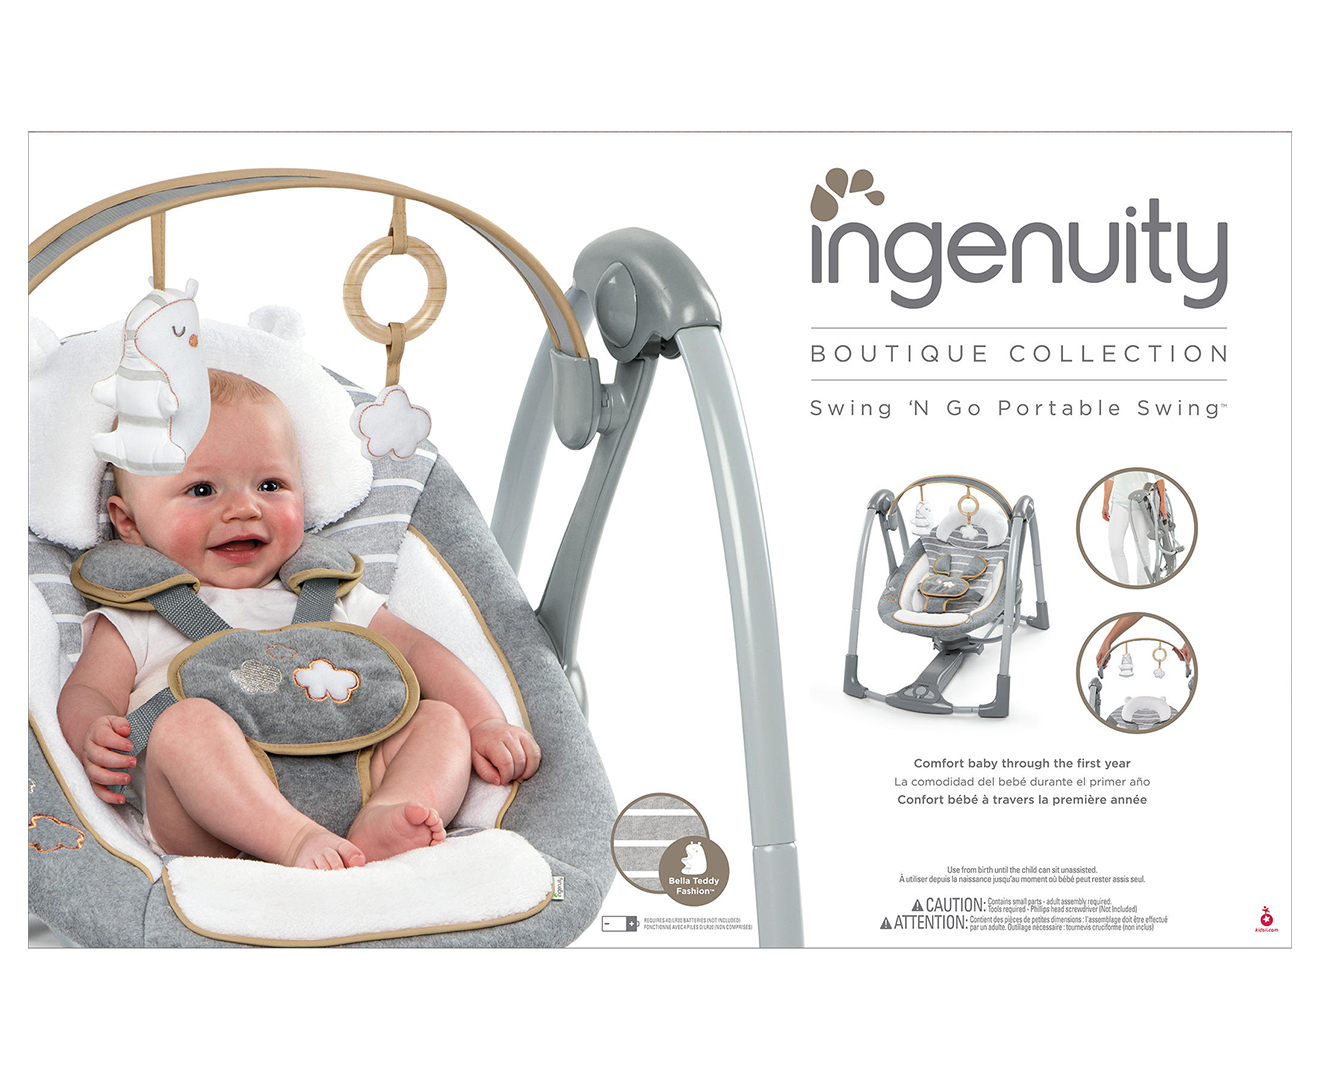 ingenuity boutique collection bella teddy